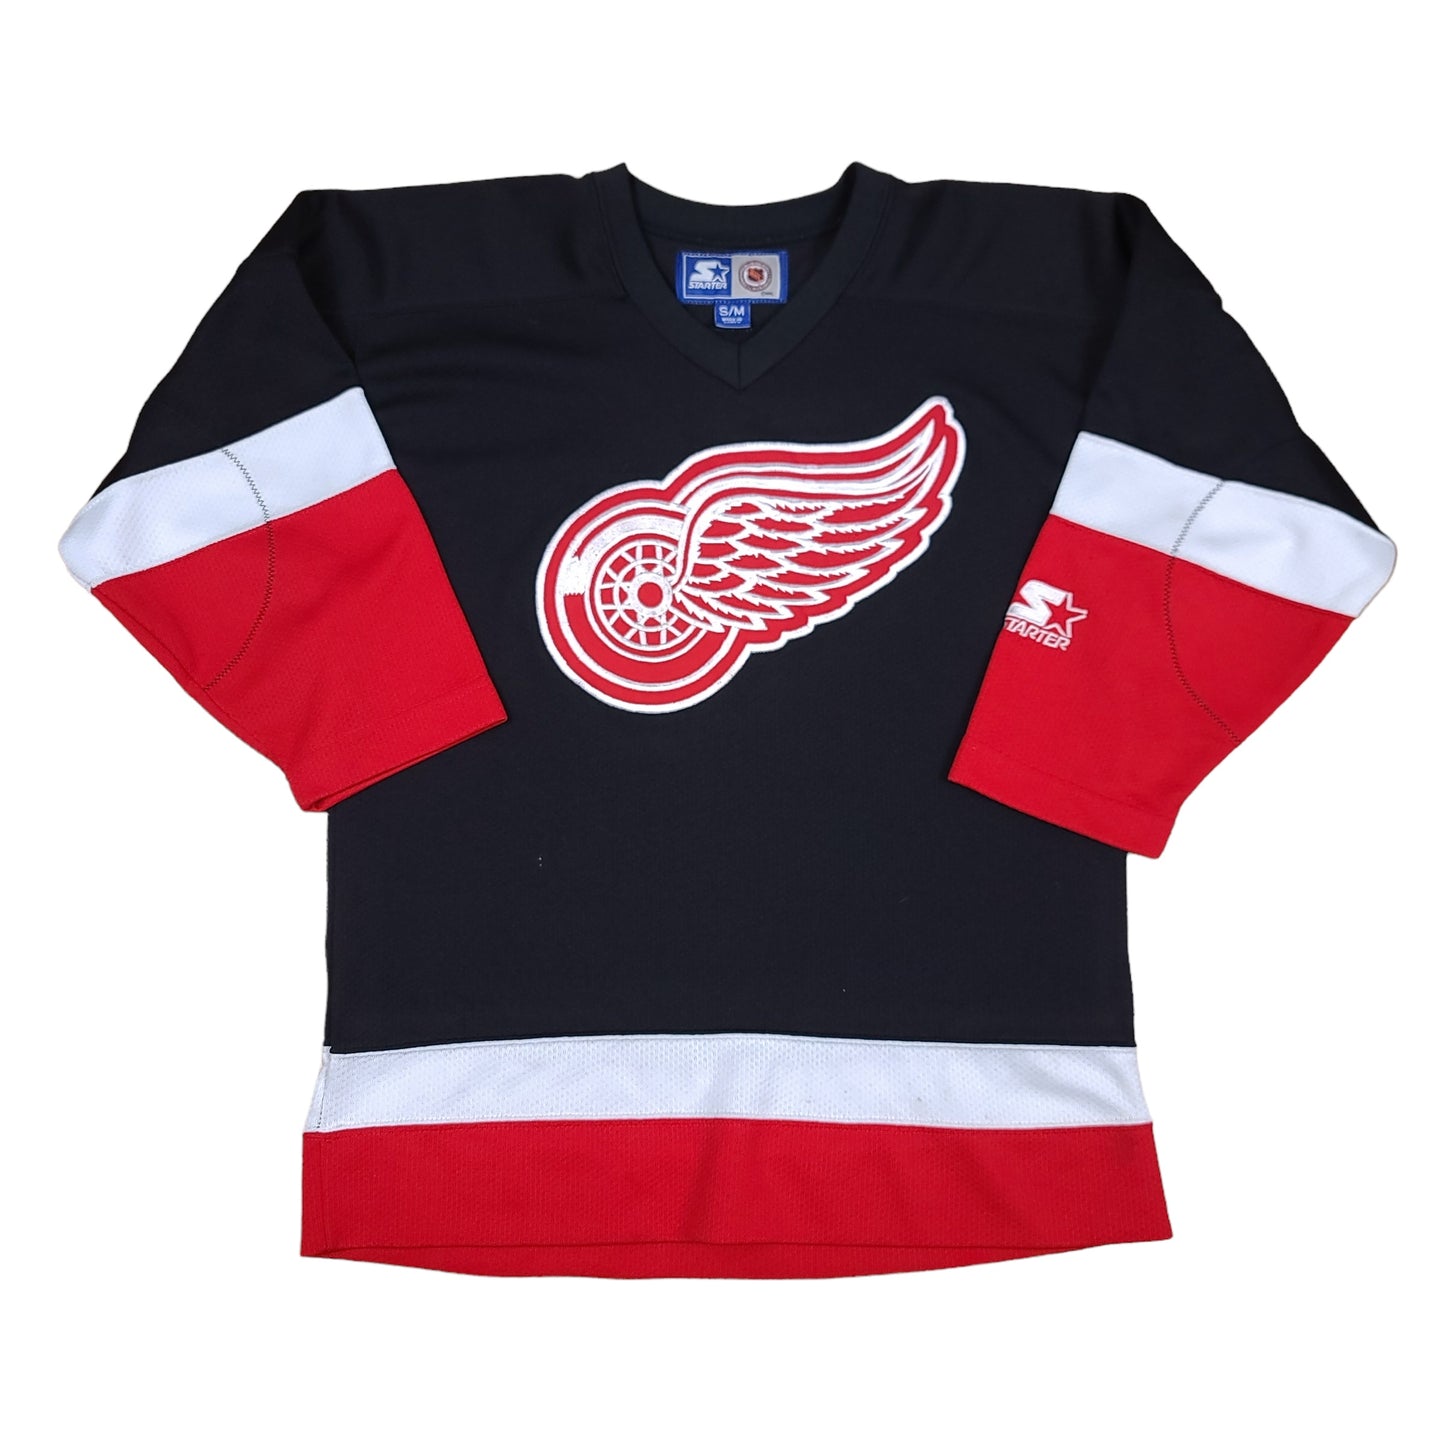 Vintage Detroit Red Wings Starter Youth Hockey Jersey